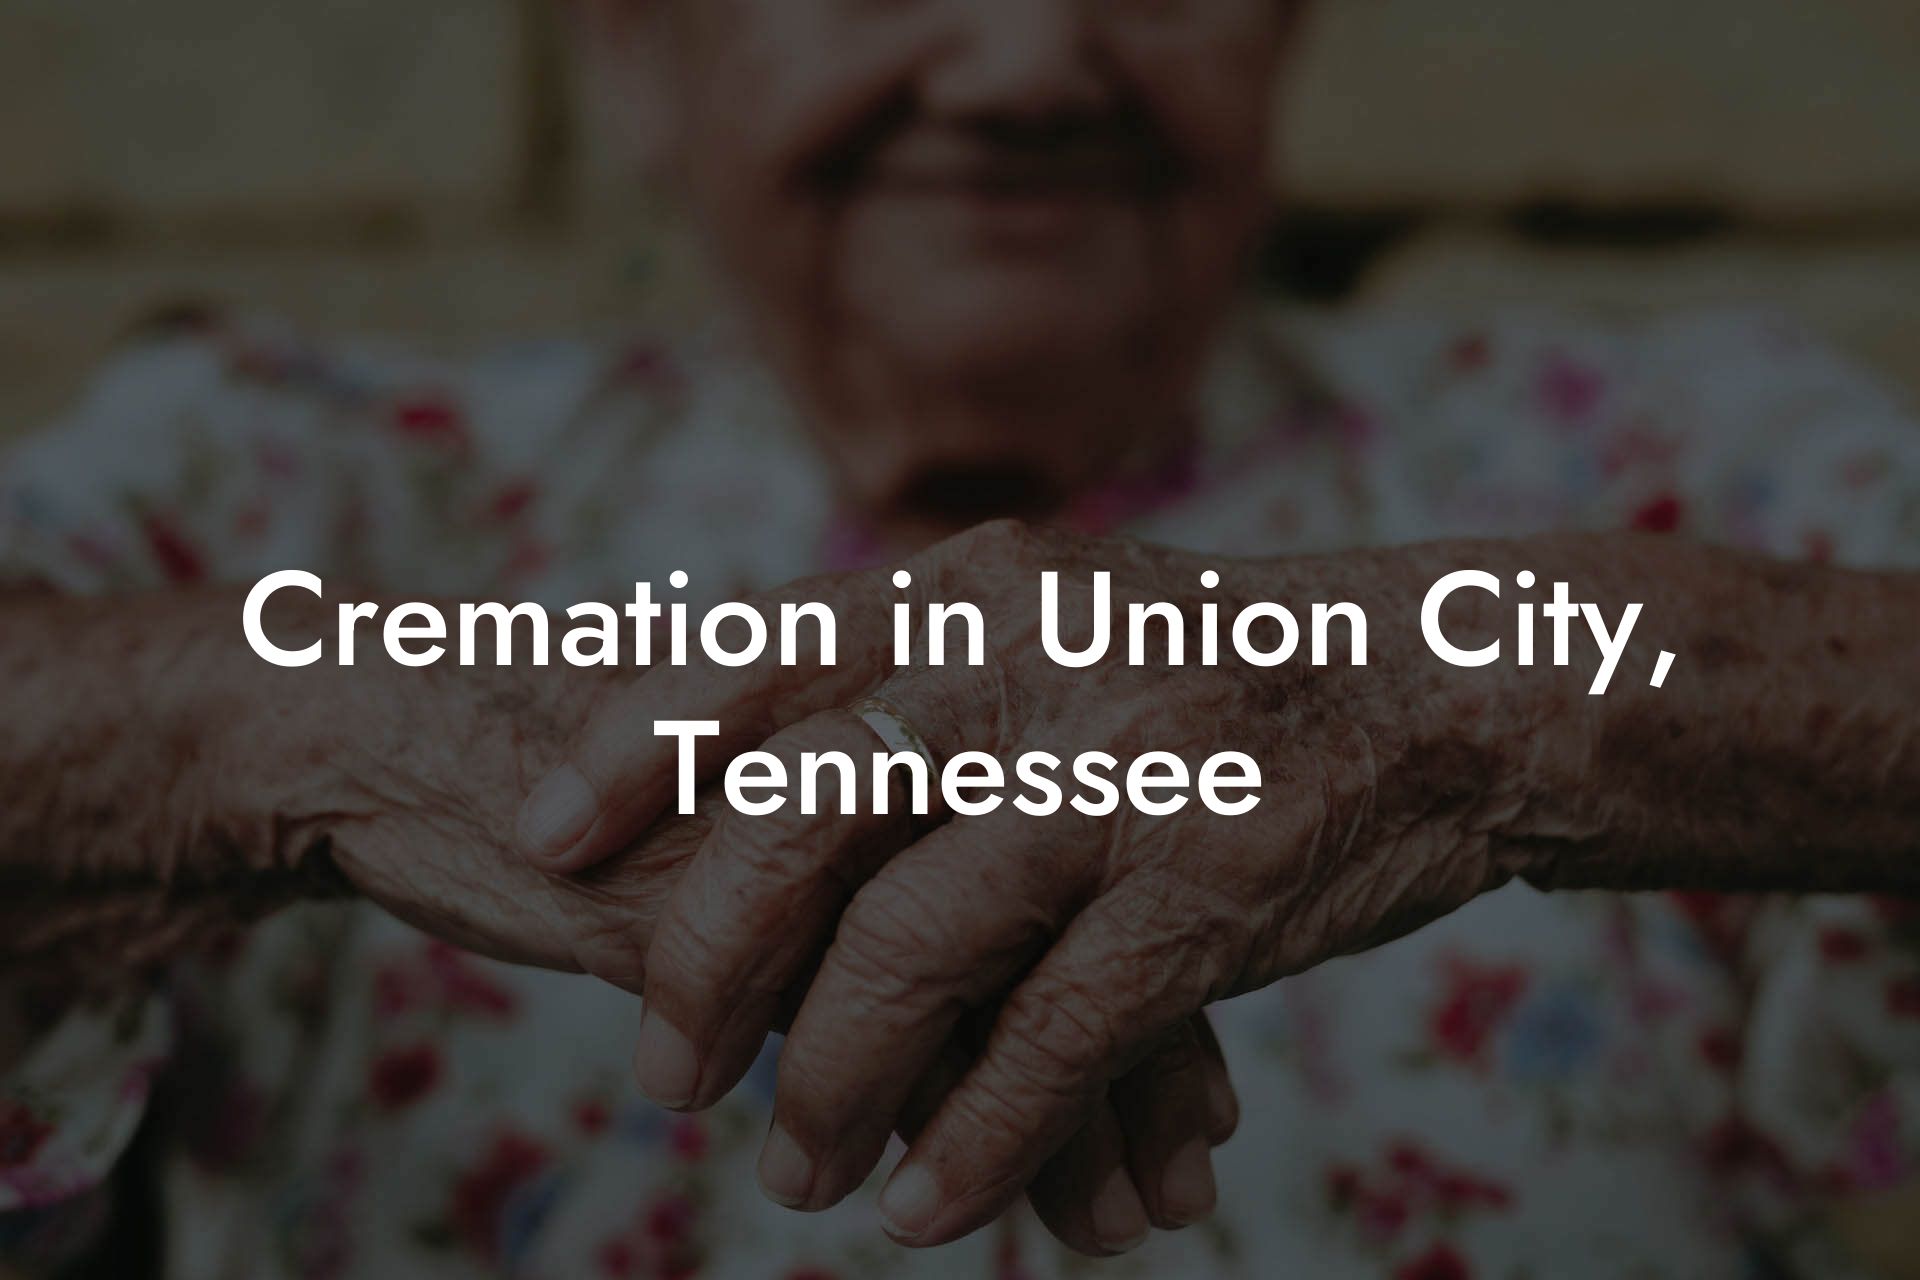 Cremation in Union City, Tennessee